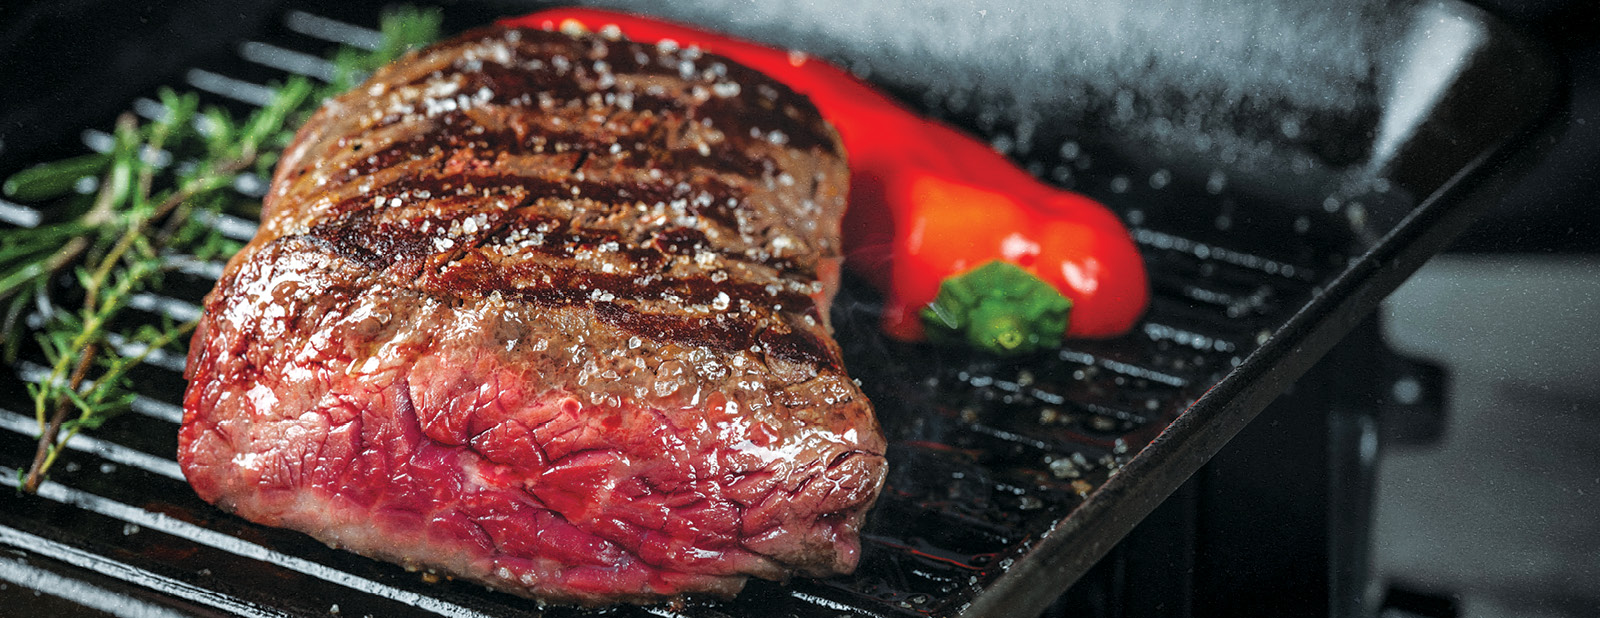 close up of a steak on a grill